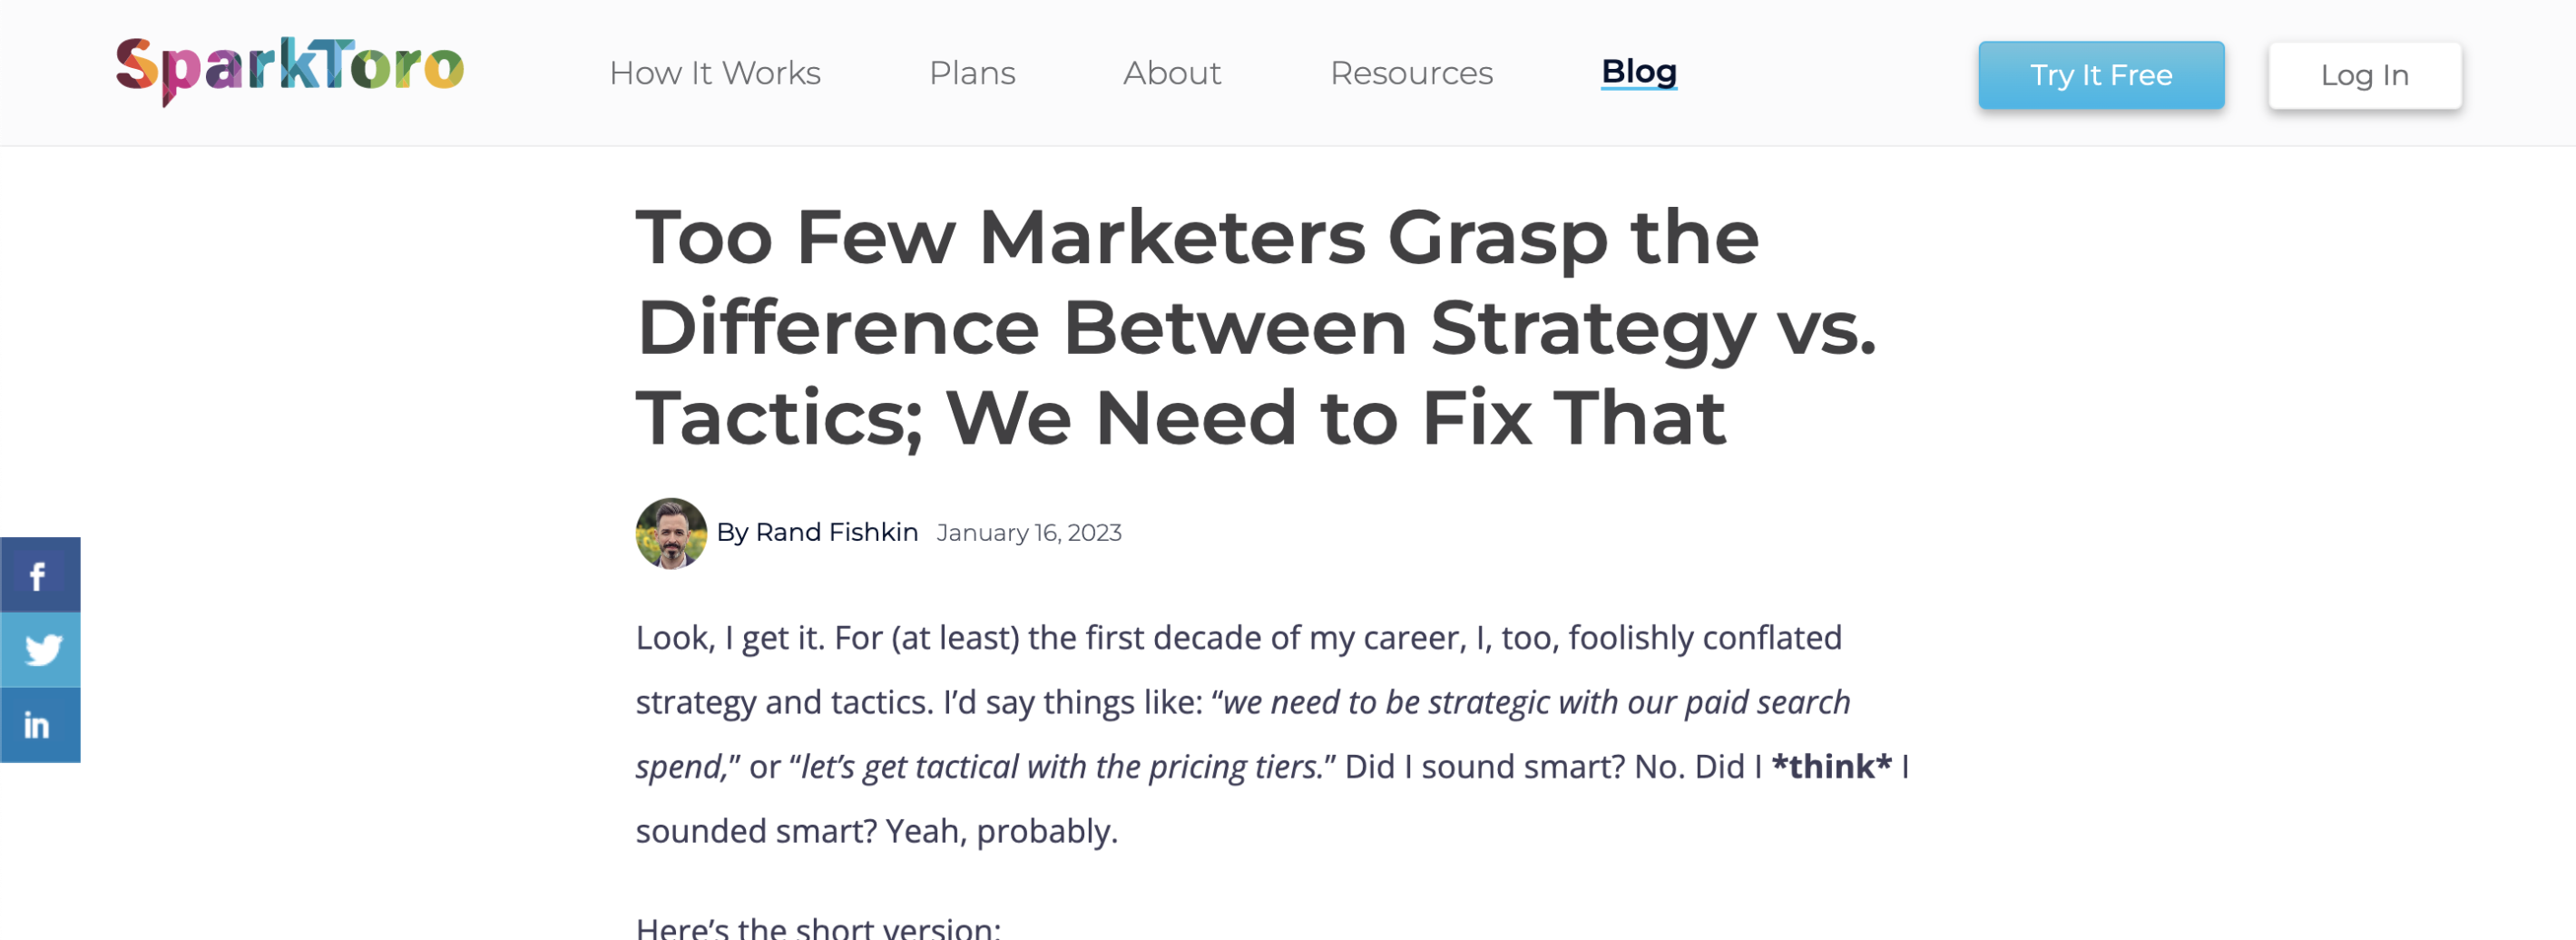 Too Few Marketers Grasp the Difference Between Strategy vs. Tactics; We Need to Fix That